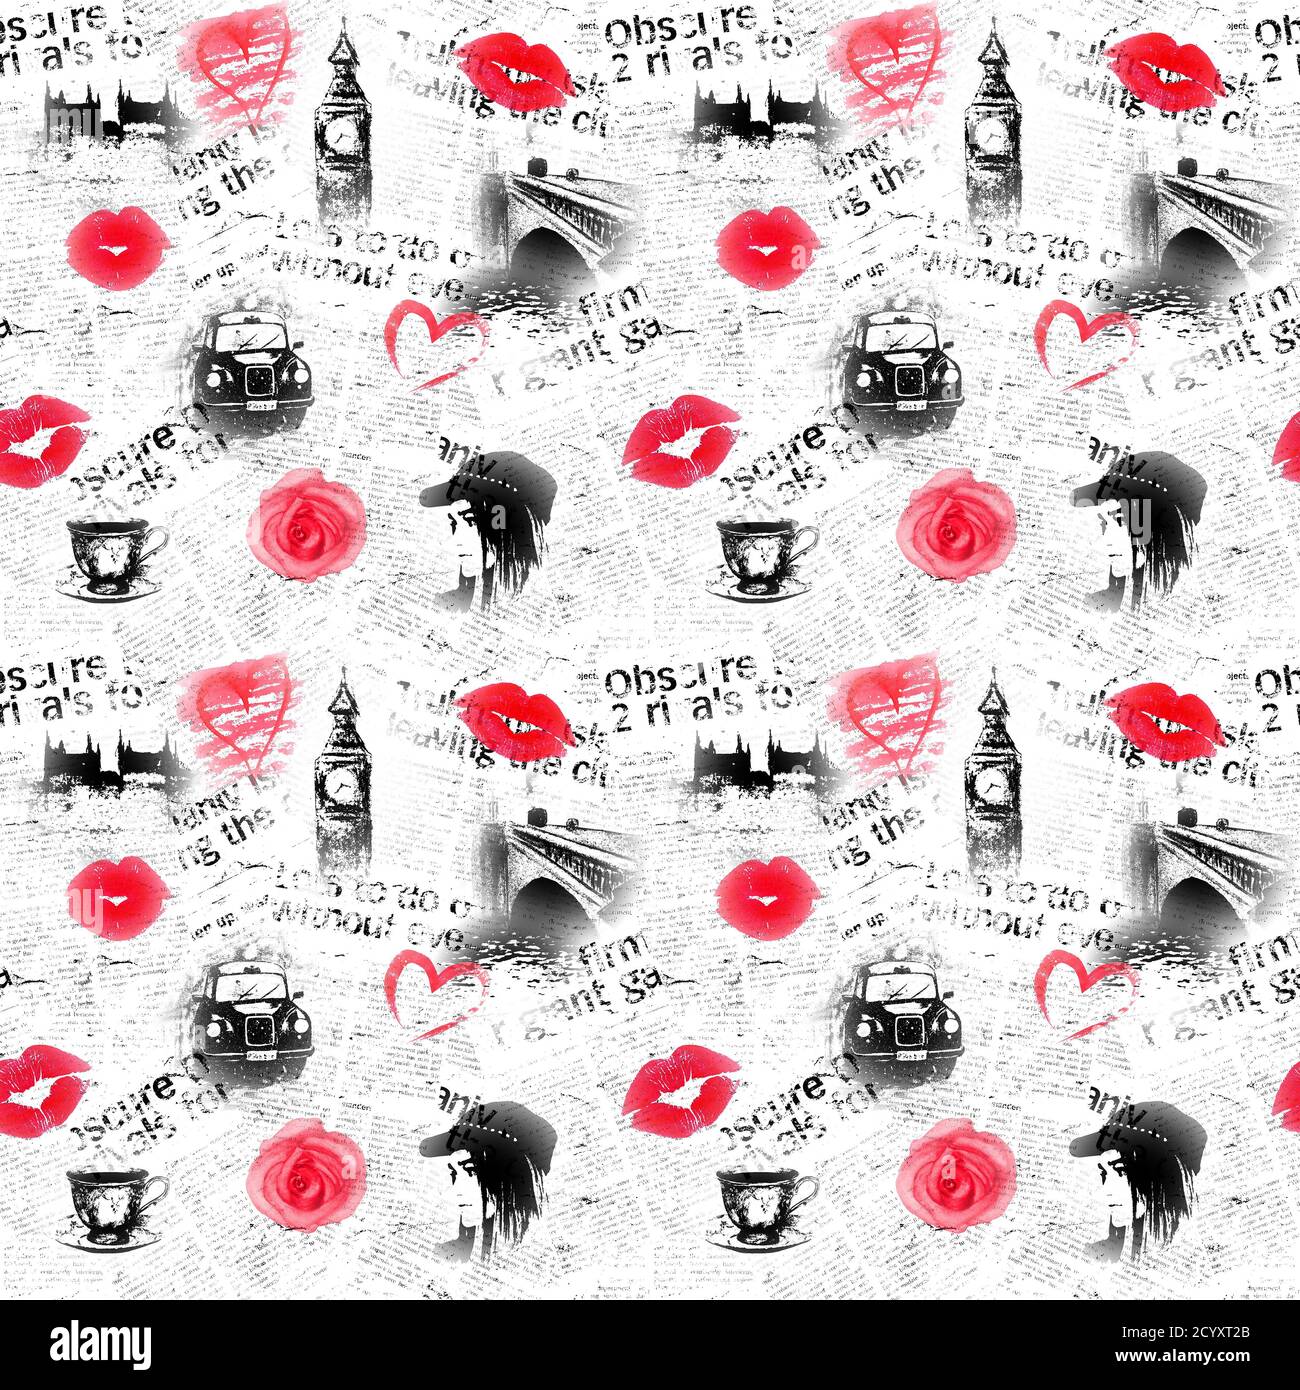 Black white and pink newspaper London grunge background. Seamless pattern with hand drawn symbols of England andl heart, rose, lipstick kiss and fashi Stock Photo